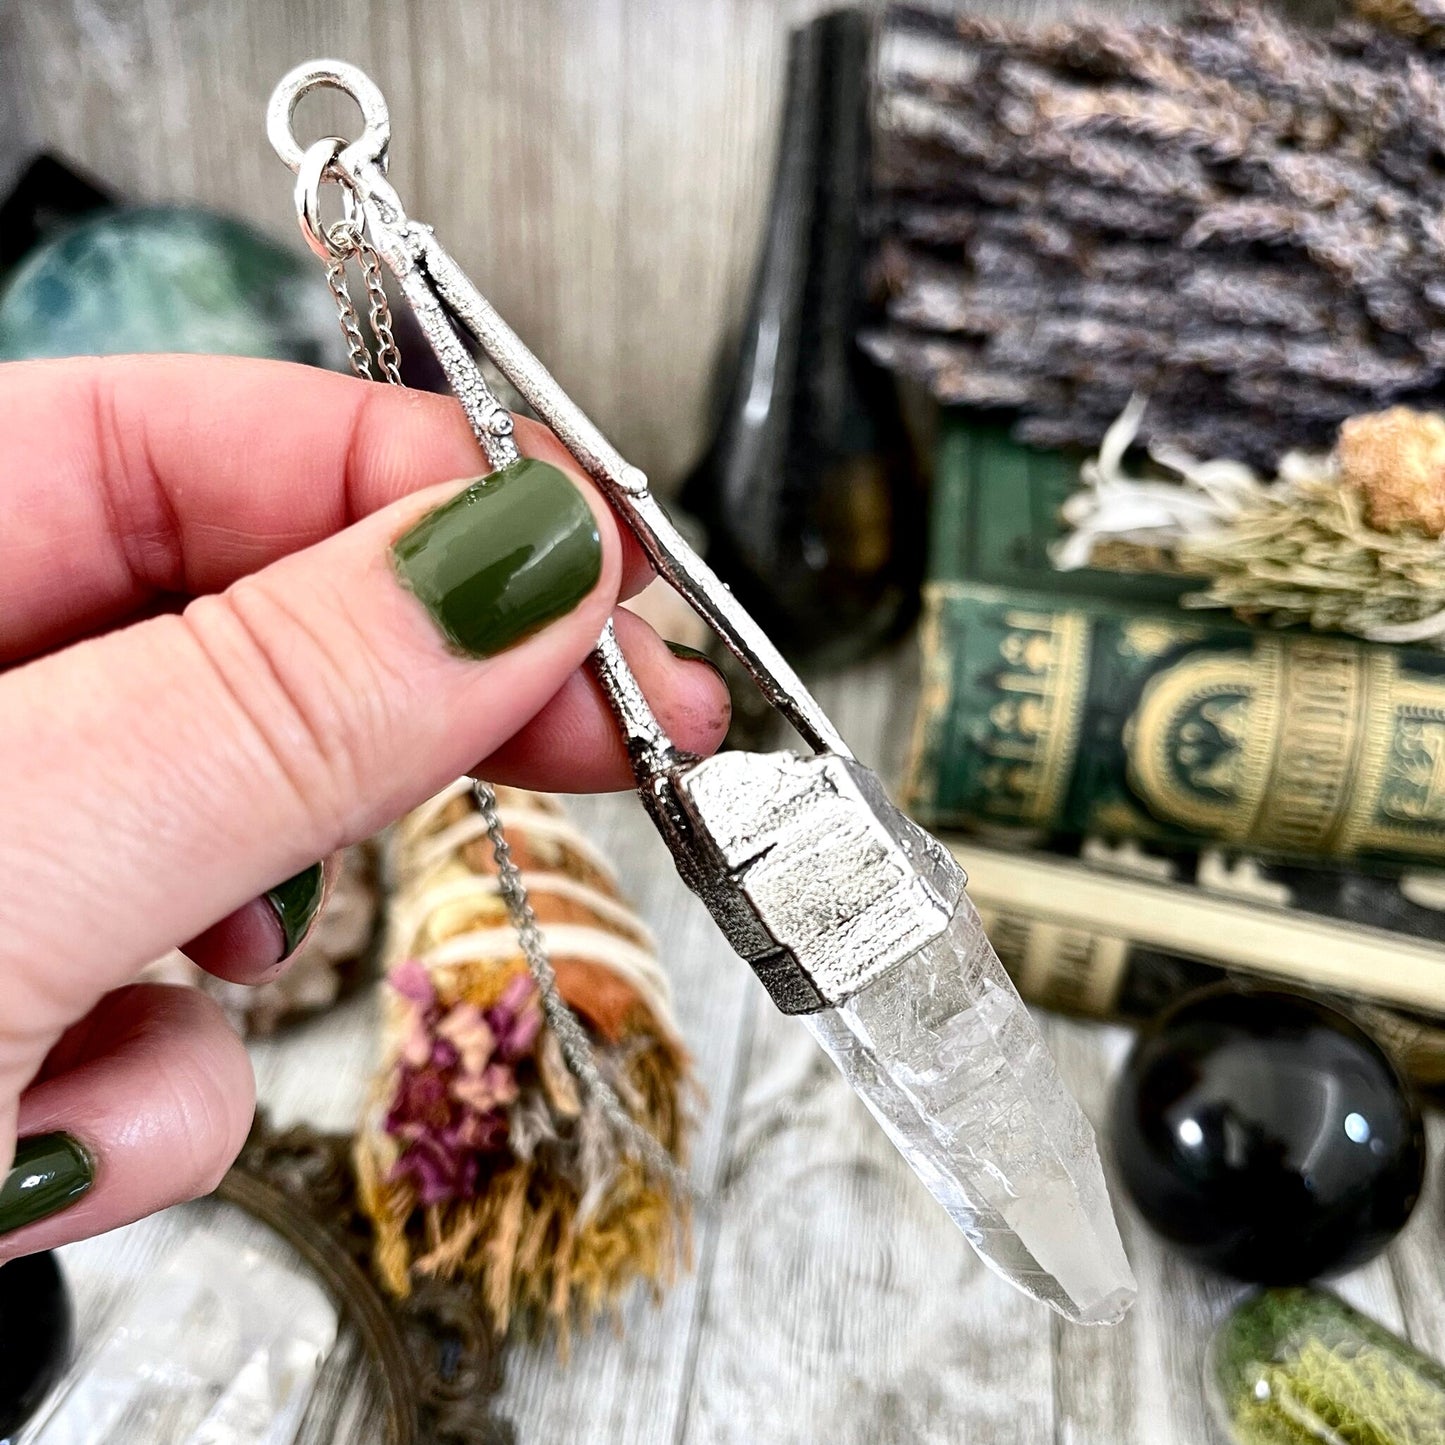 big crystal Necklace, Big Gothic Necklace, Bohemian Jewelry, Crystal Necklaces, Crystal Pendant, Etsy ID: 1650768126, FOXLARK- NECKLACES, Jewelry, nature inspired, Necklaces, Quartz Jewelry, Silver Jewelry, Silver Necklace, Silver Stone Jewelry, Statement